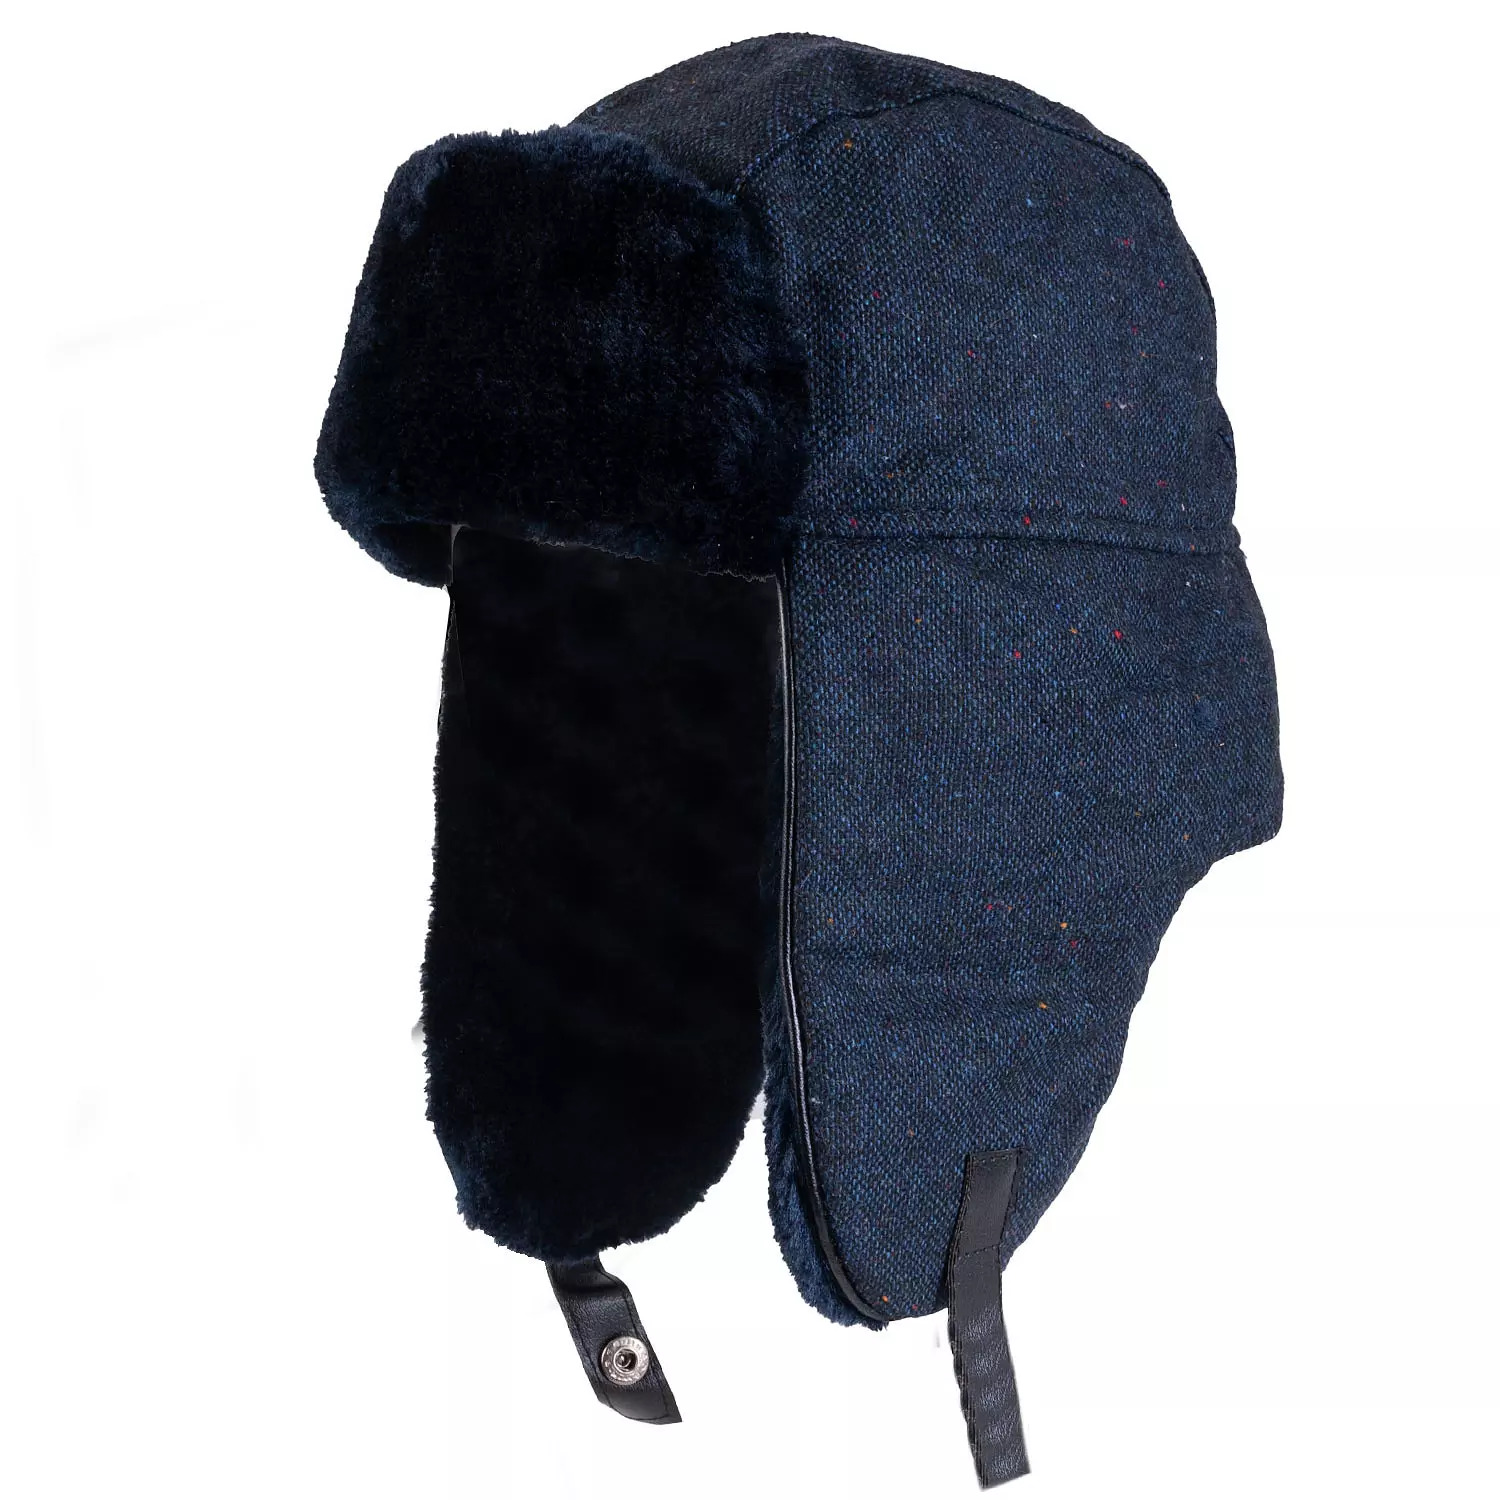 Wool tweed aviator hat with faux fur lining & trims, navy